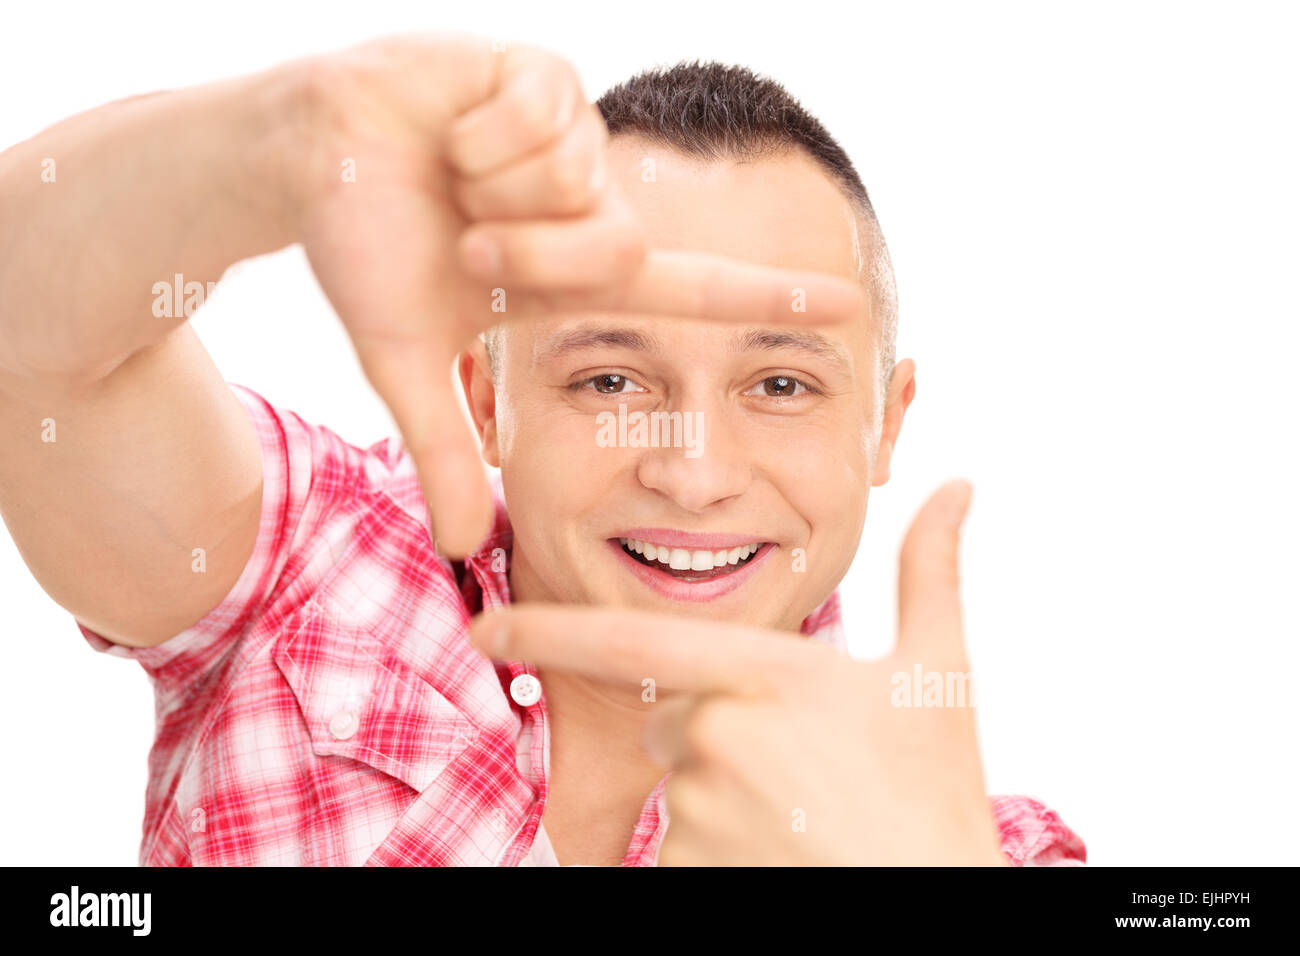 Close-up on a young Caucasian guy framing a photo with his fingers isolated on white background Stock Photo